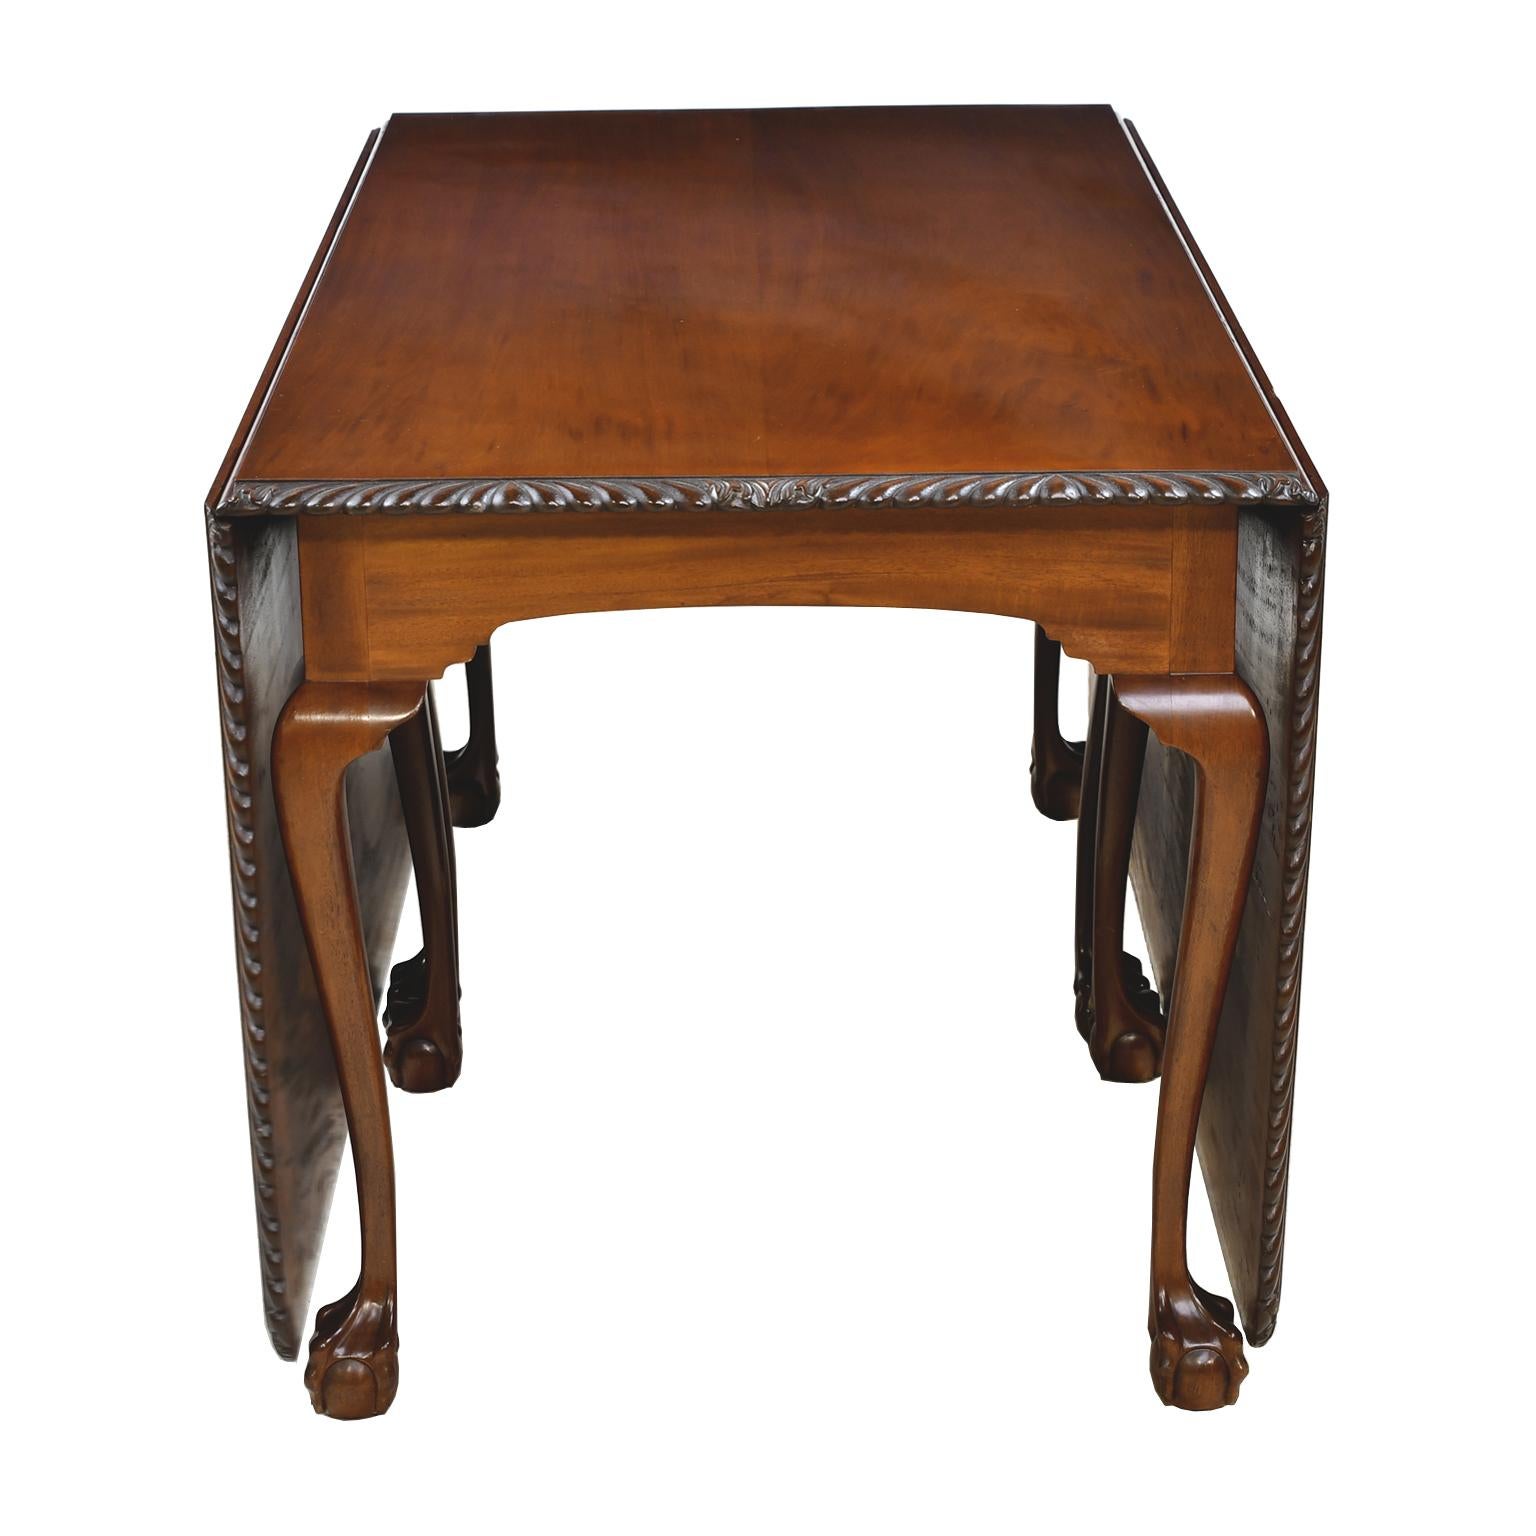 American Large Centennial Queen Anne-Style Drop-Leaf Dining Table Philadelphia circa 1880 For Sale